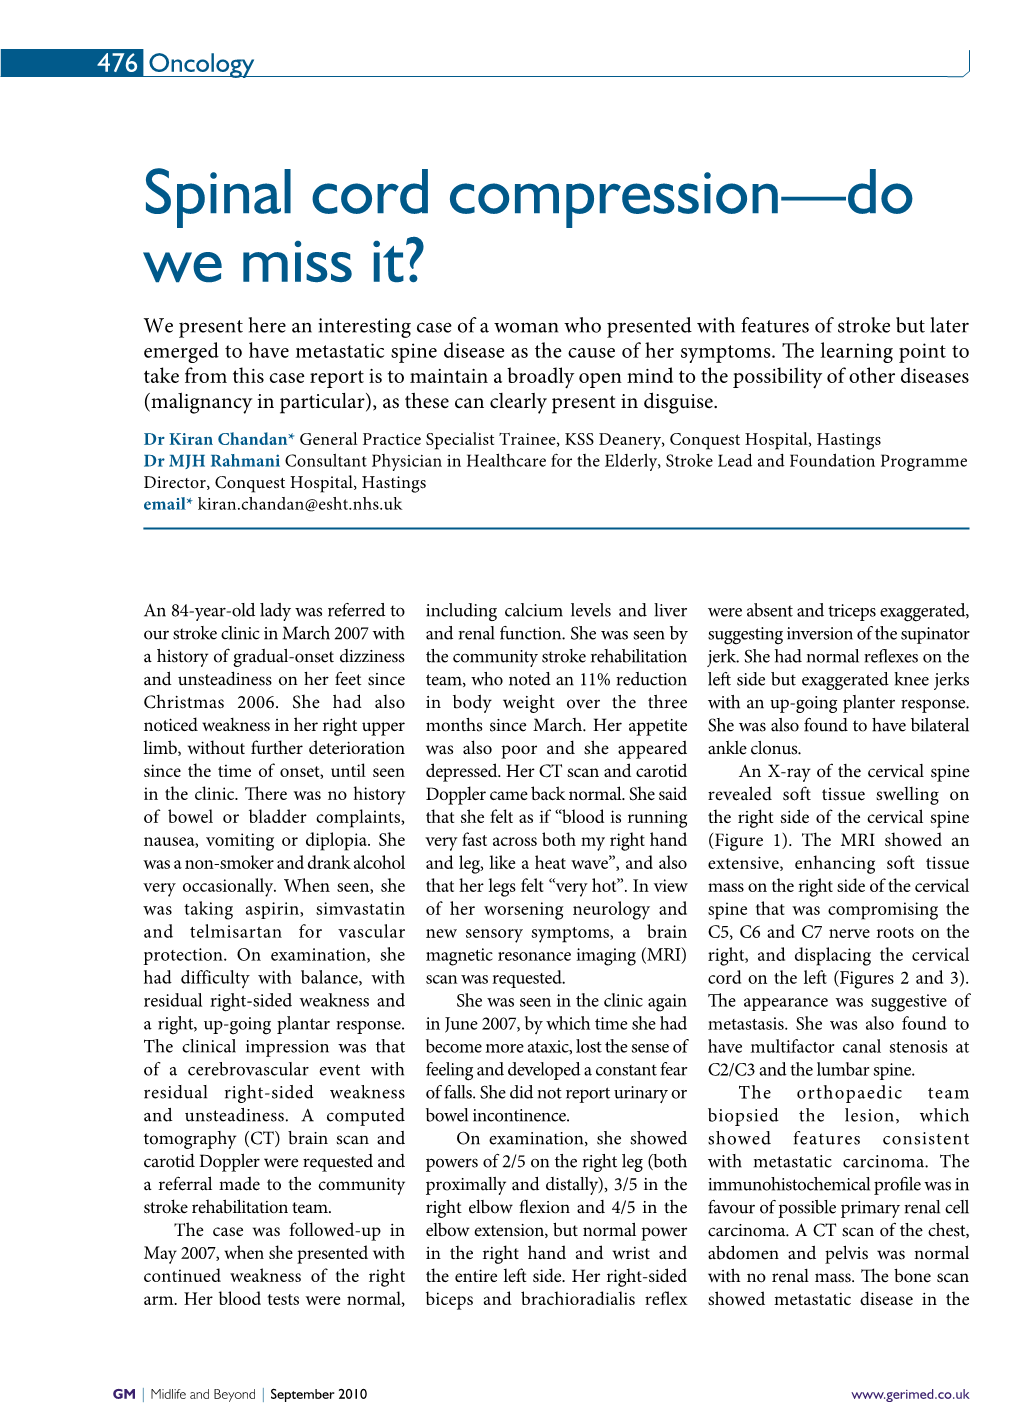 Spinal Cord Compression—Do We Miss